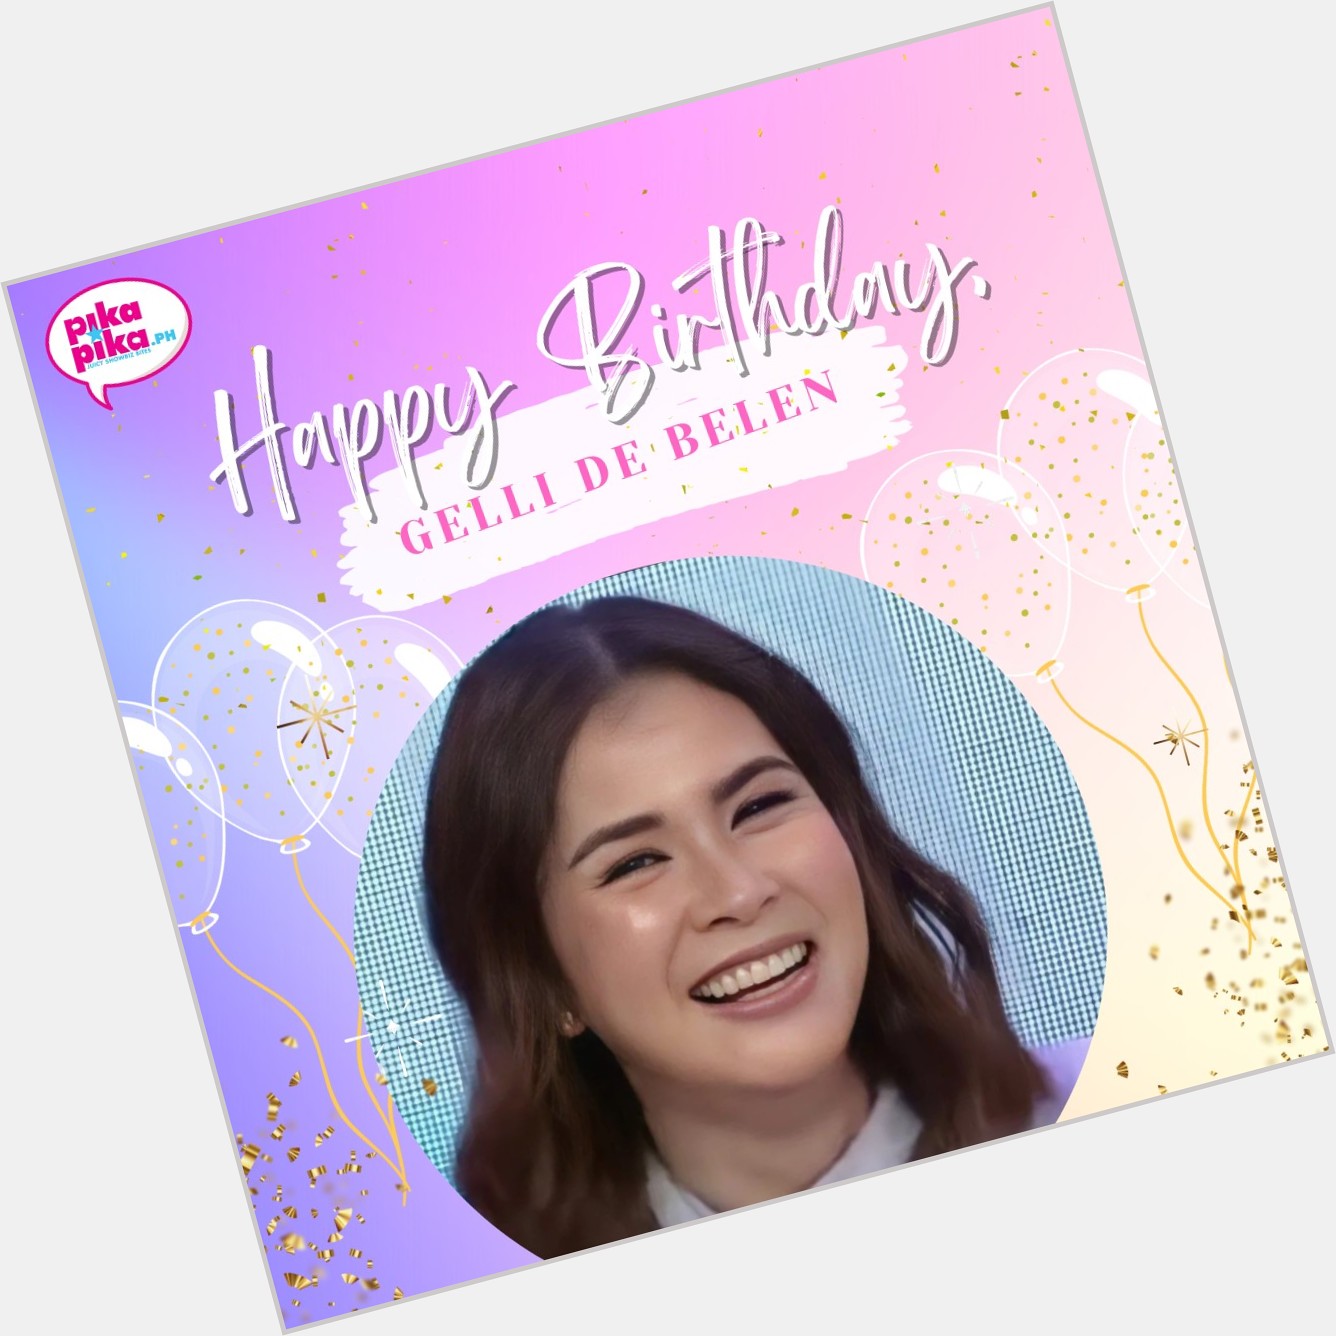 Happy birthday, Gelli De Belen! May your special day be filled with love and cheers.    